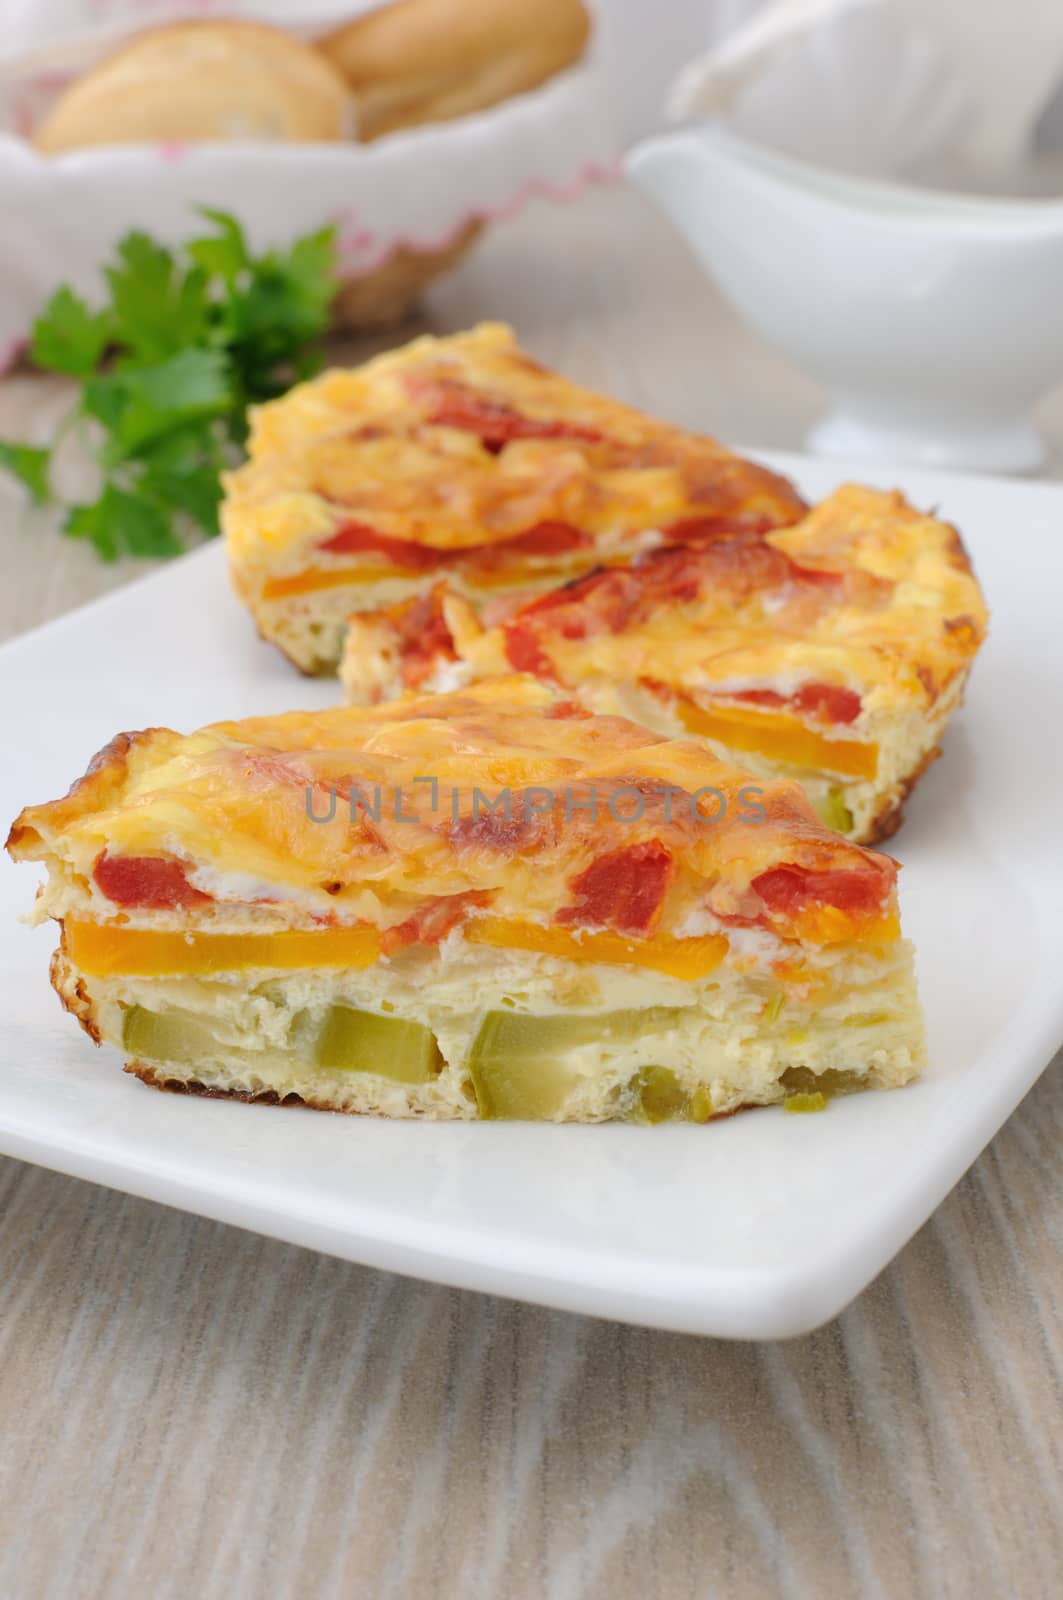 portion omelette with zucchini, carrot, tomato, cheese